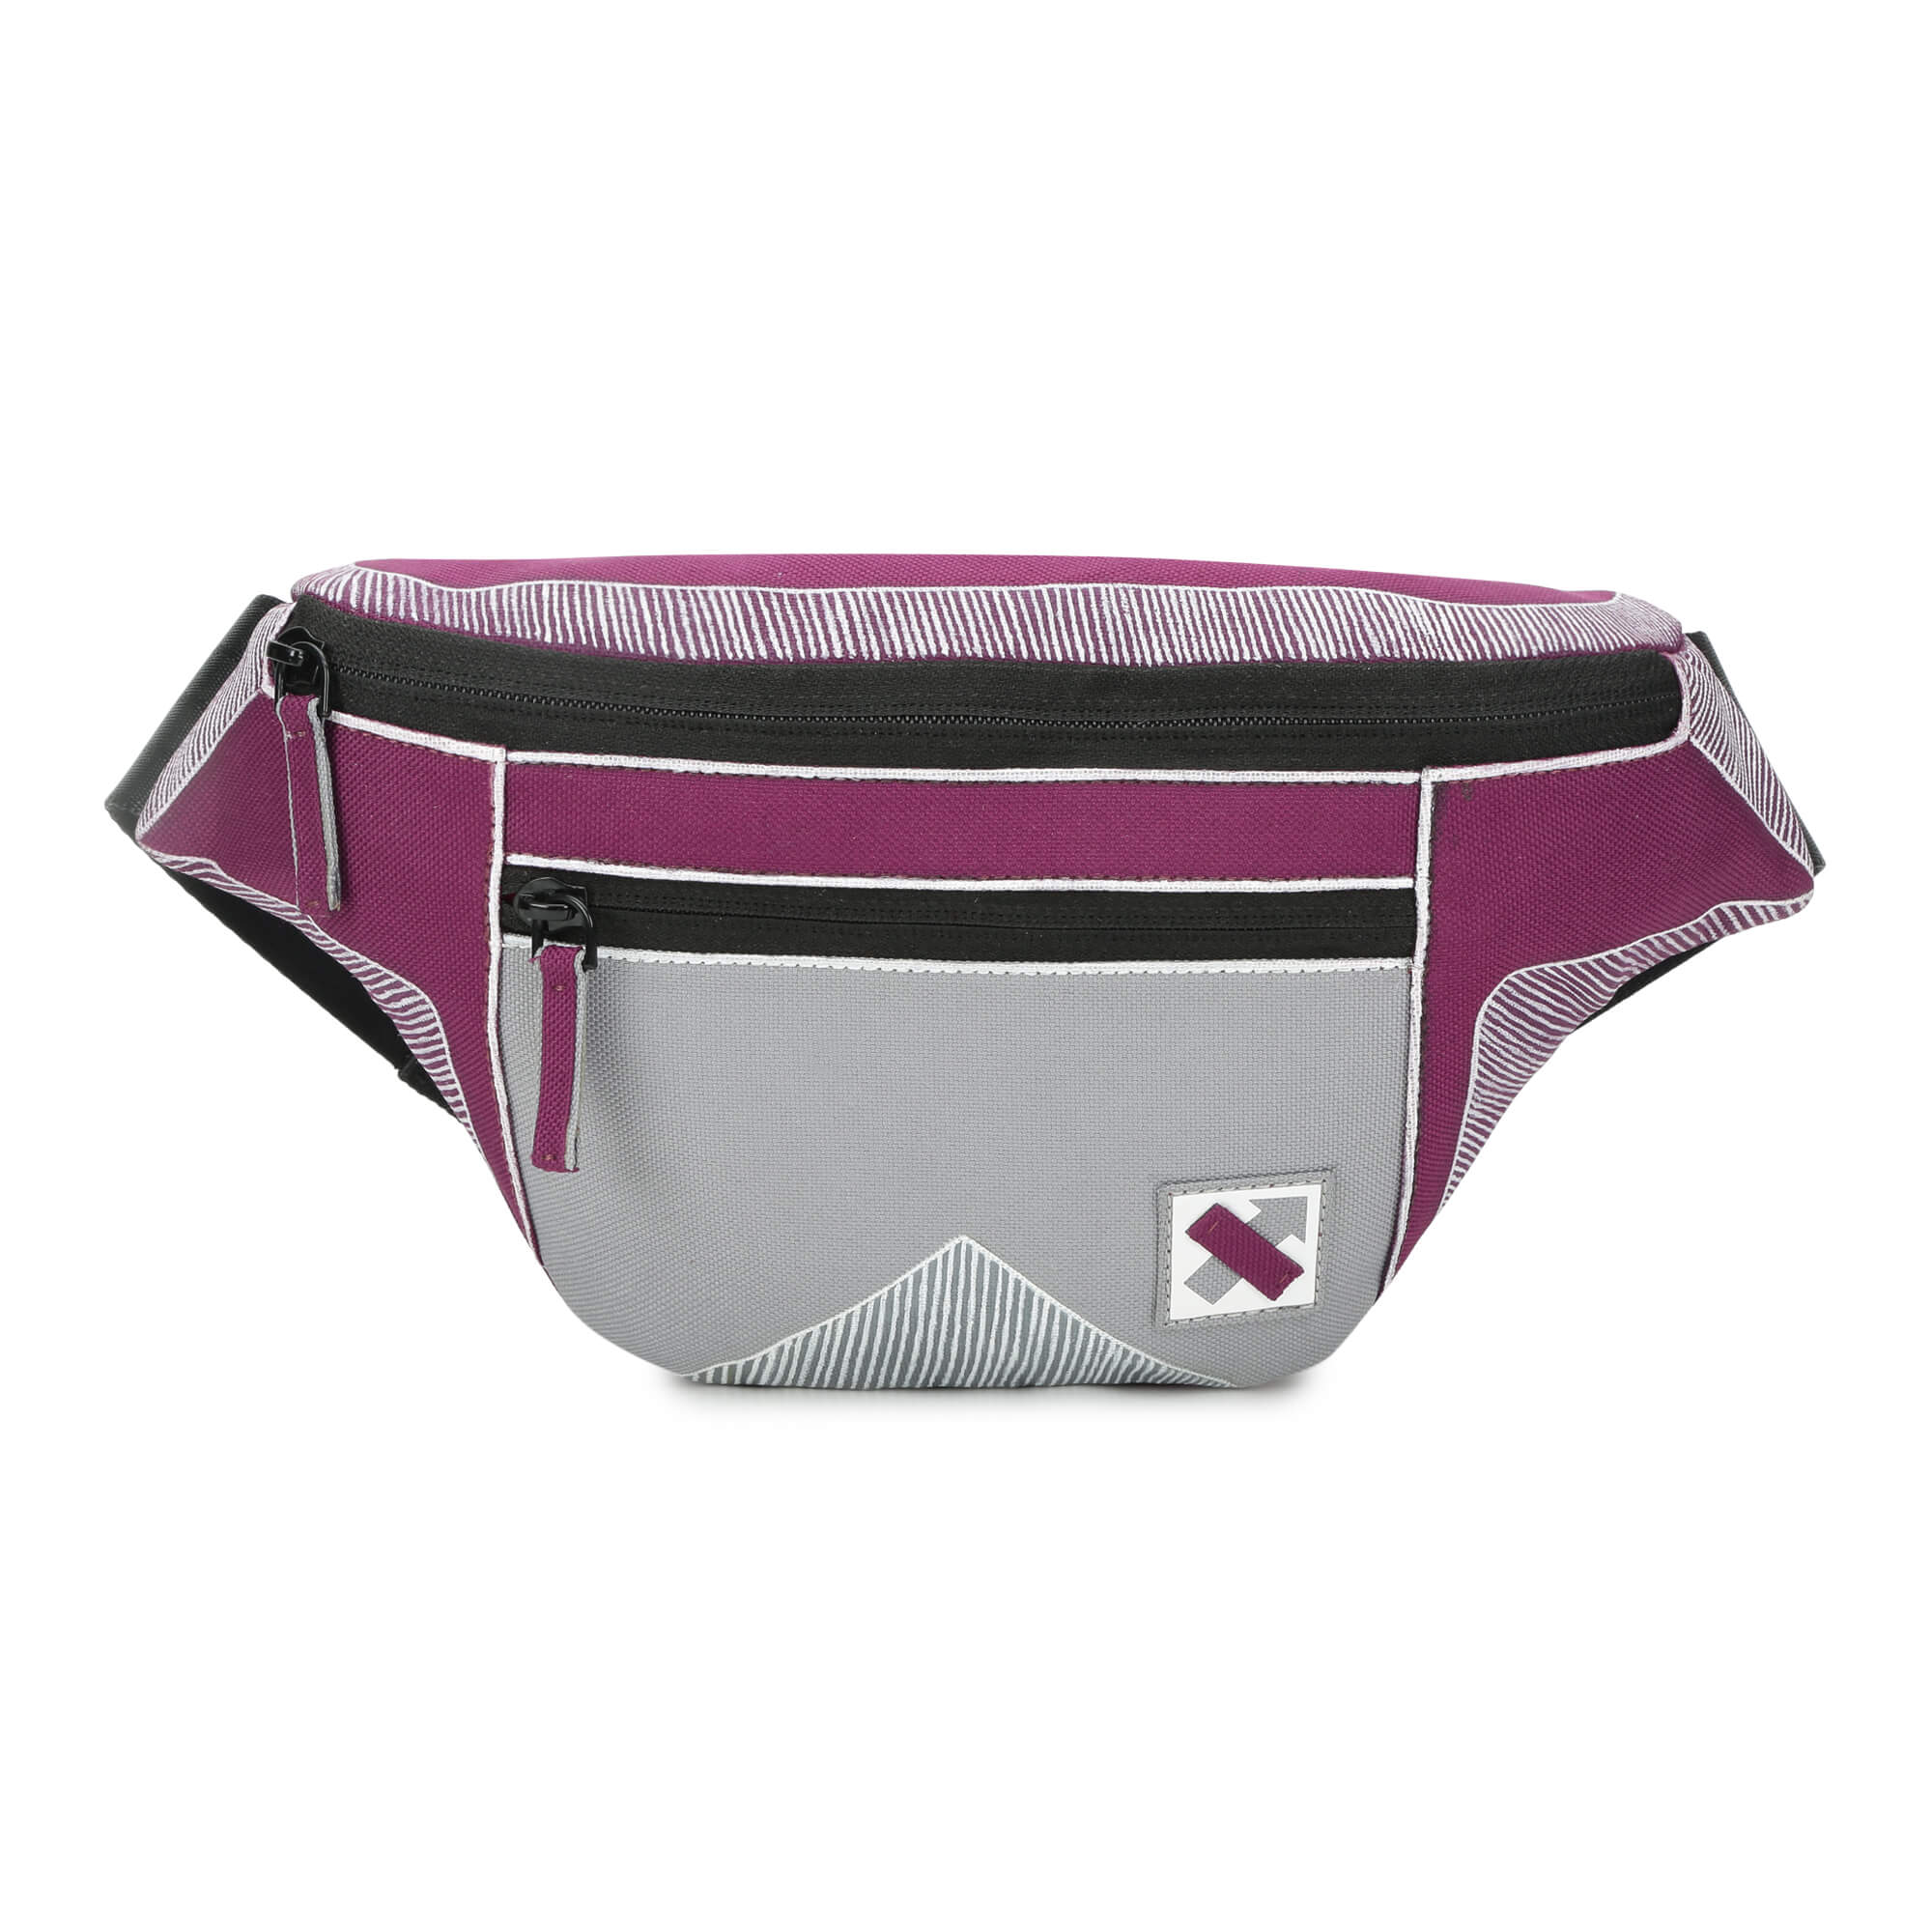 SKETCH UP 137.6 FANNY PACK